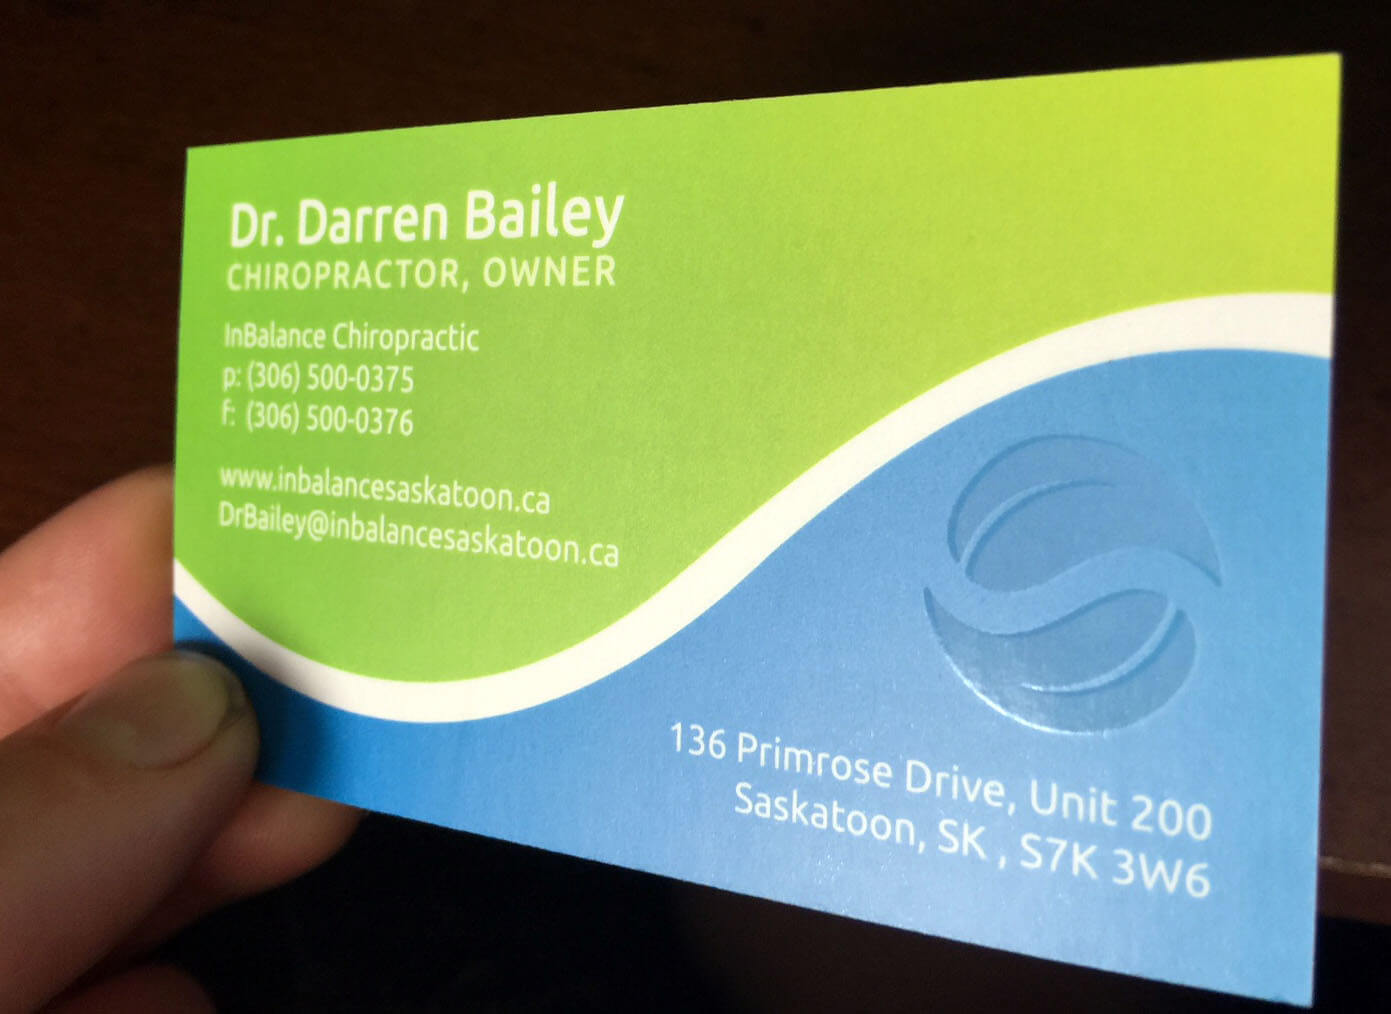 The reverse side of the InBalance business card uses bold colours